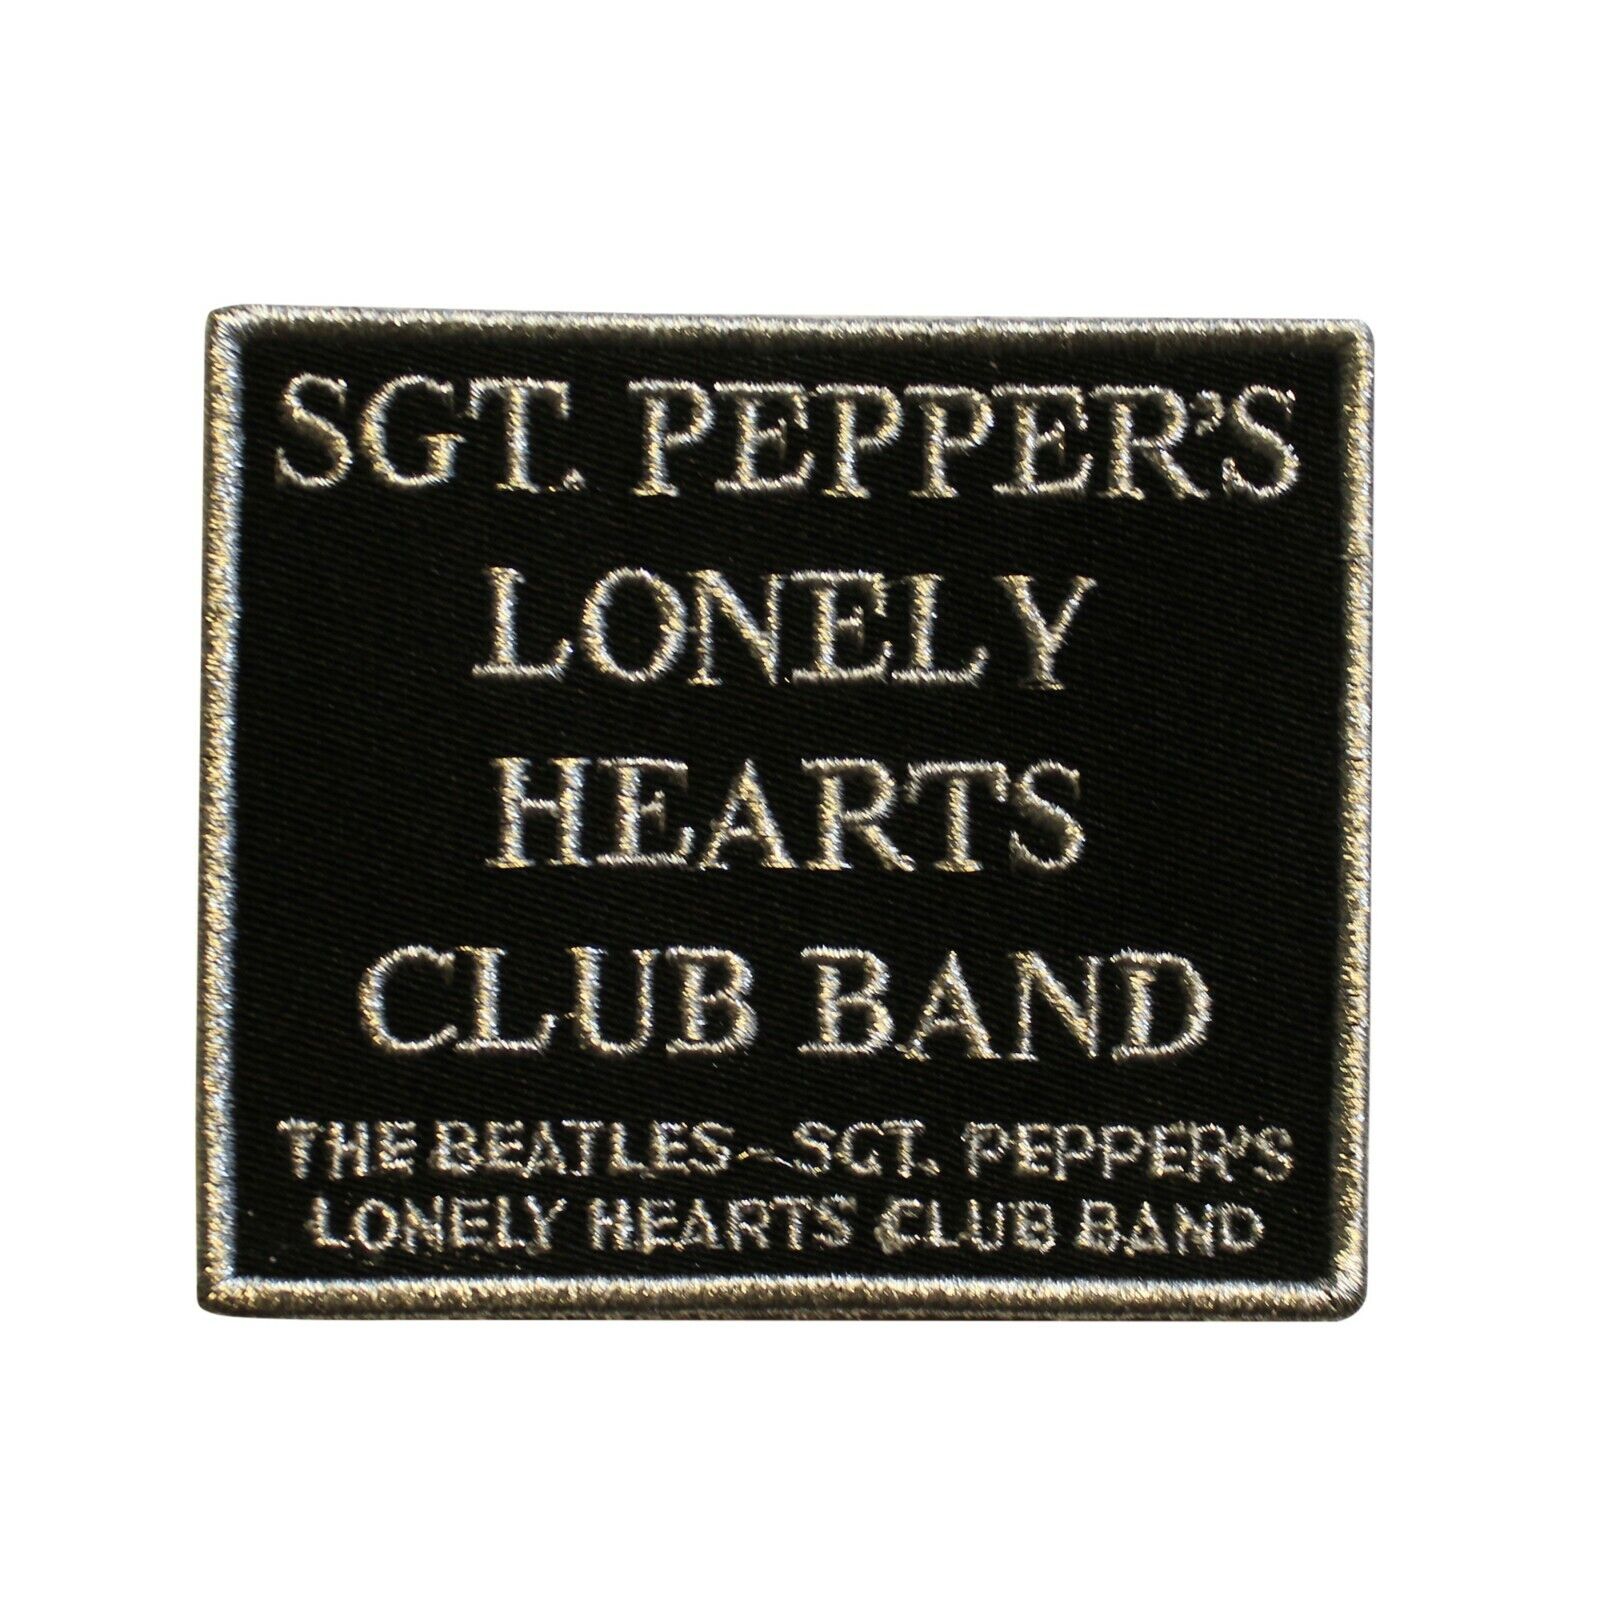 The Beatles Sgt Peppers Lonely Hearts Club Band Embroidered Sew On Patch - 075-C